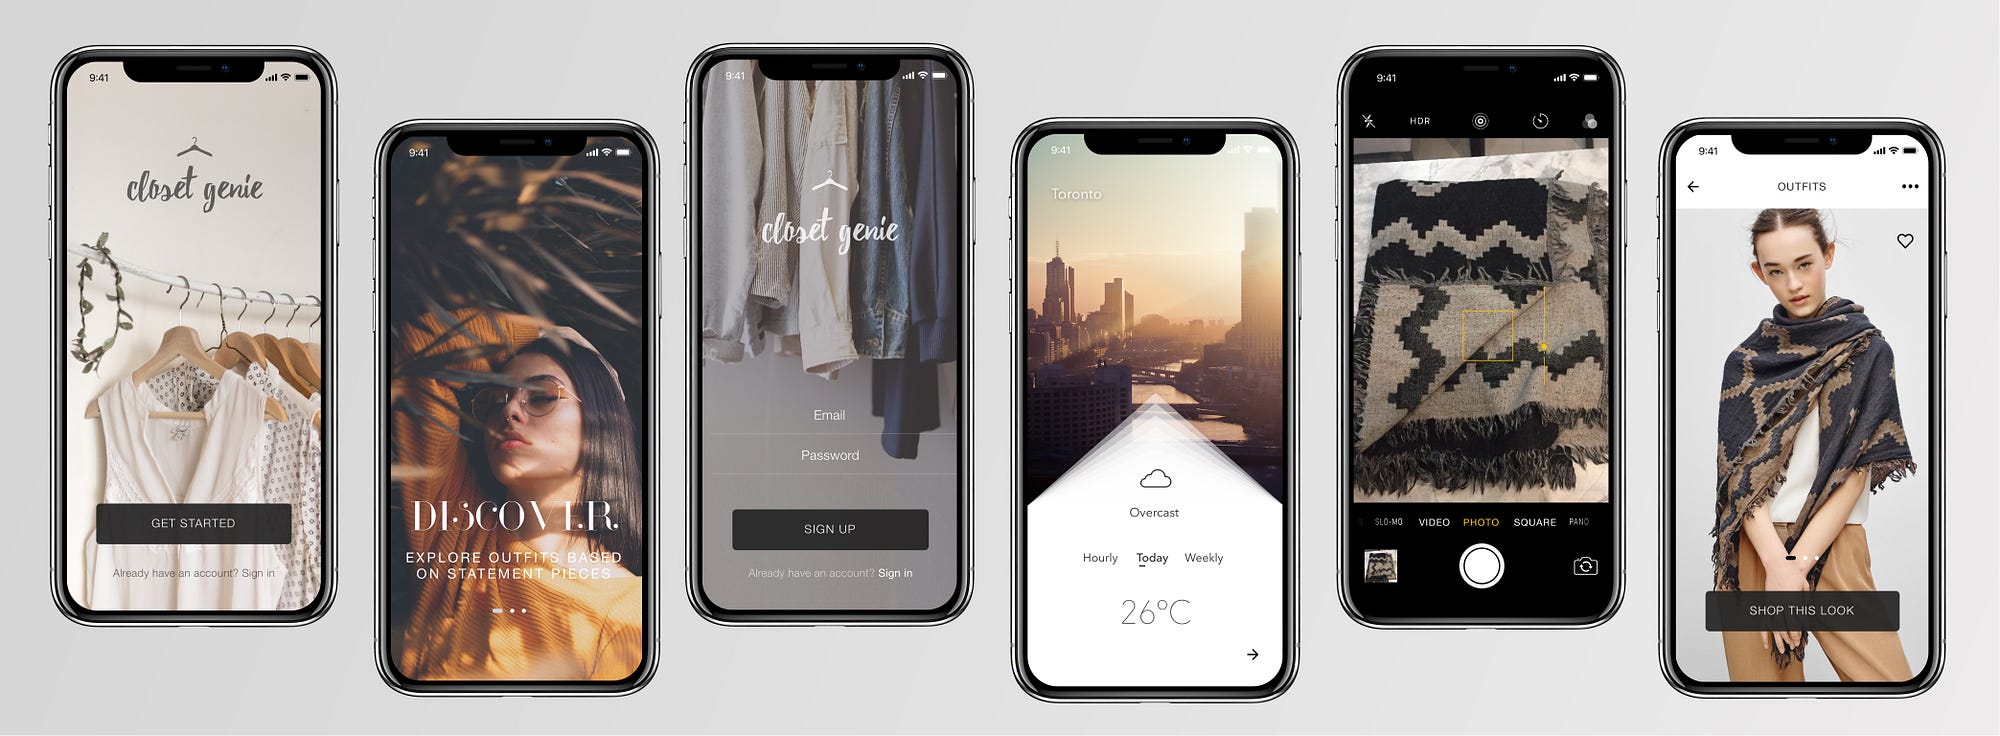 Fashion inspiration block? Here's an app to style your unique statement  pieces— Yelp Product Design Challenge (passed the test) | by Komal Javed |  UX Collective